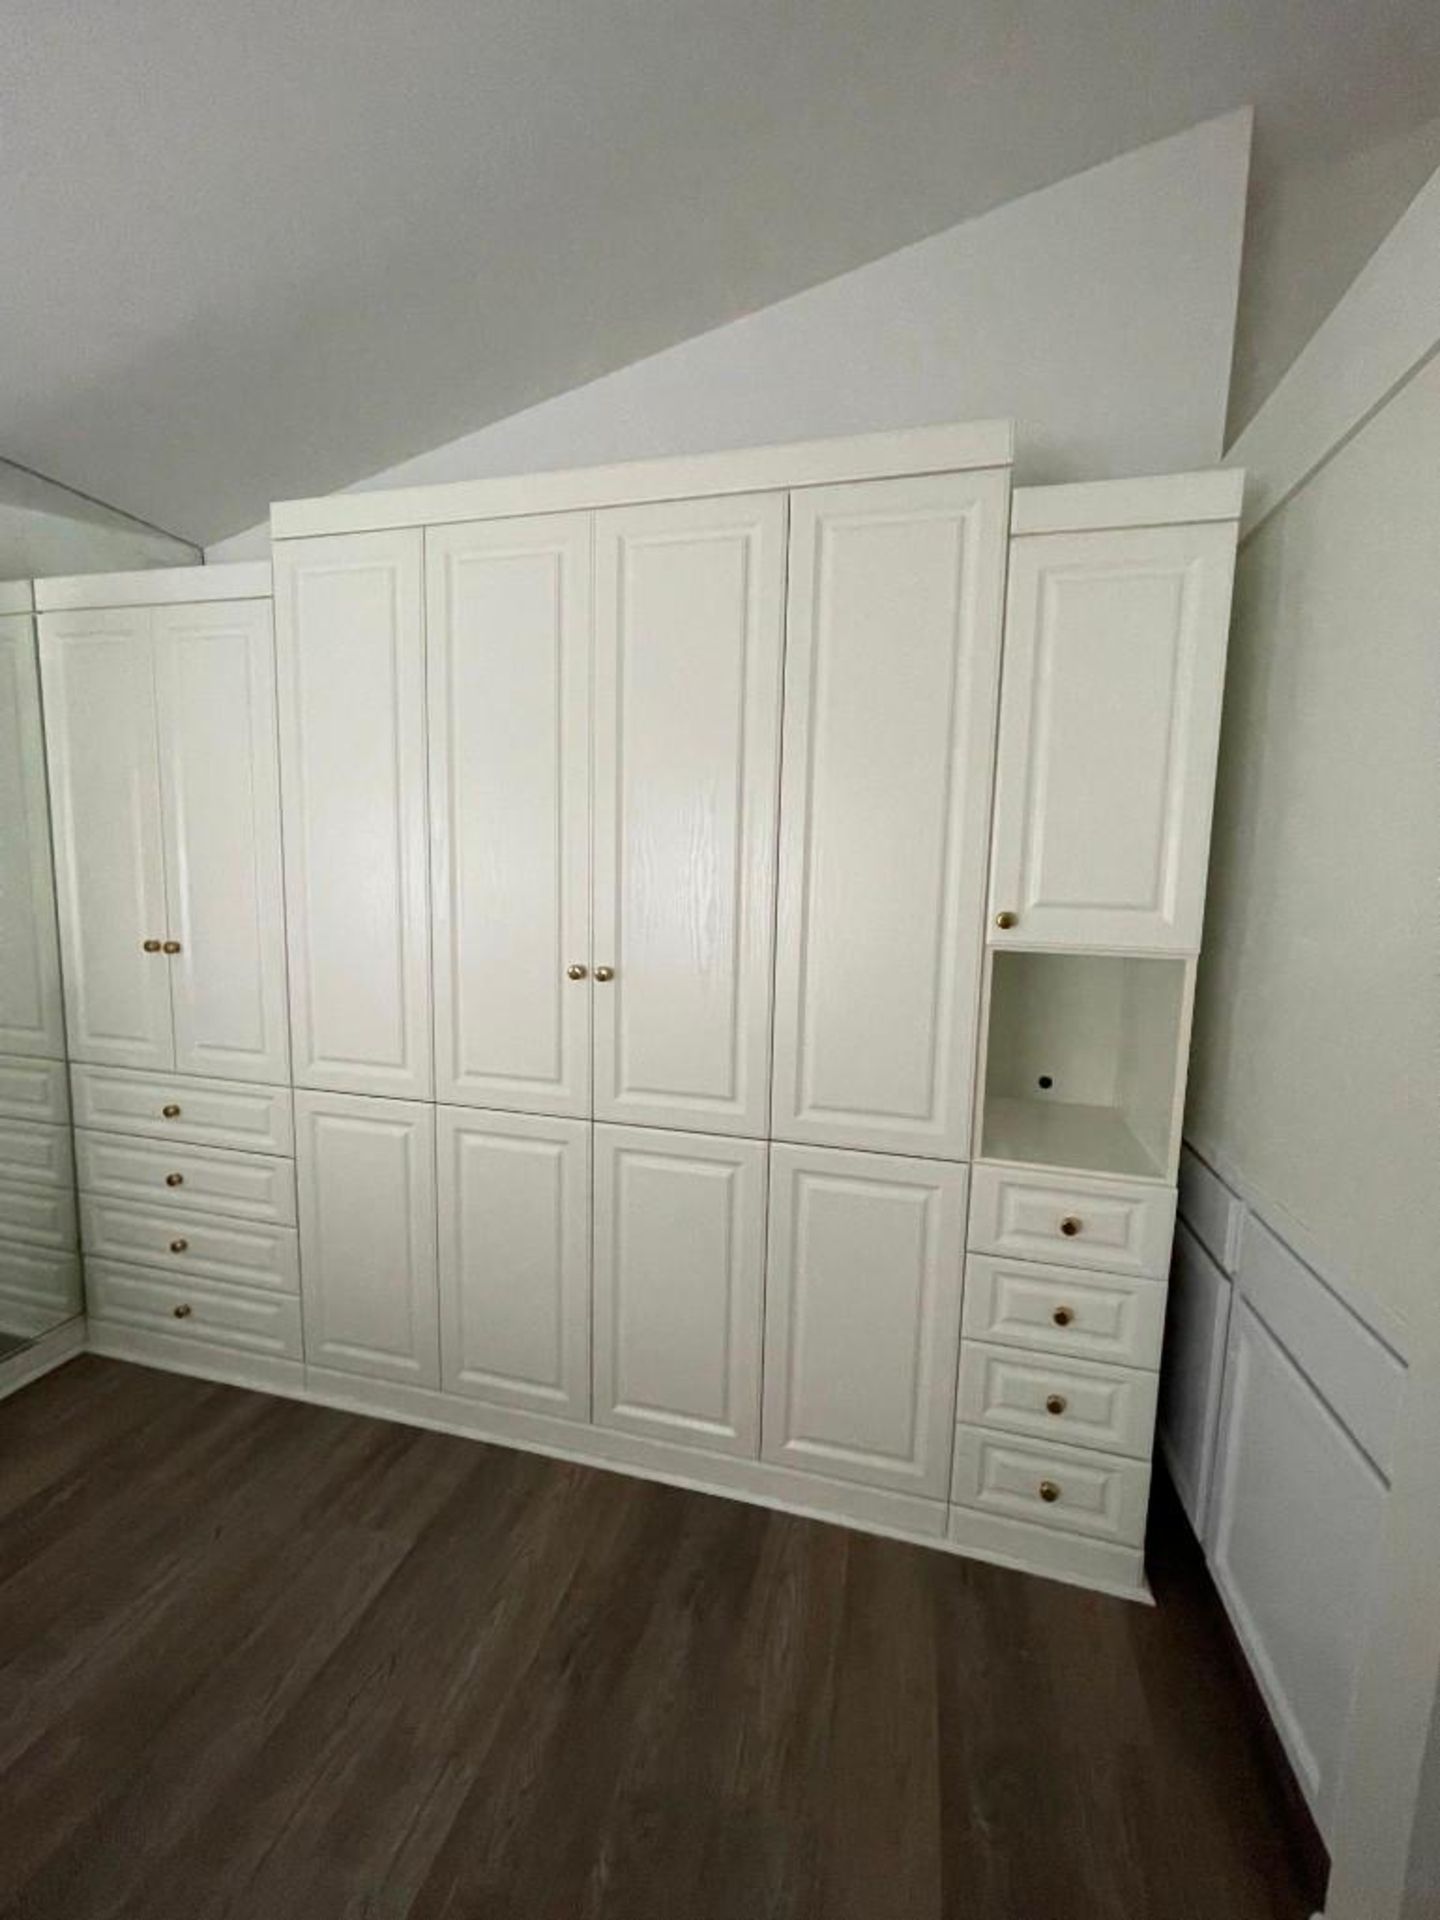 MURPHY BED WALL UNIT - Image 2 of 6